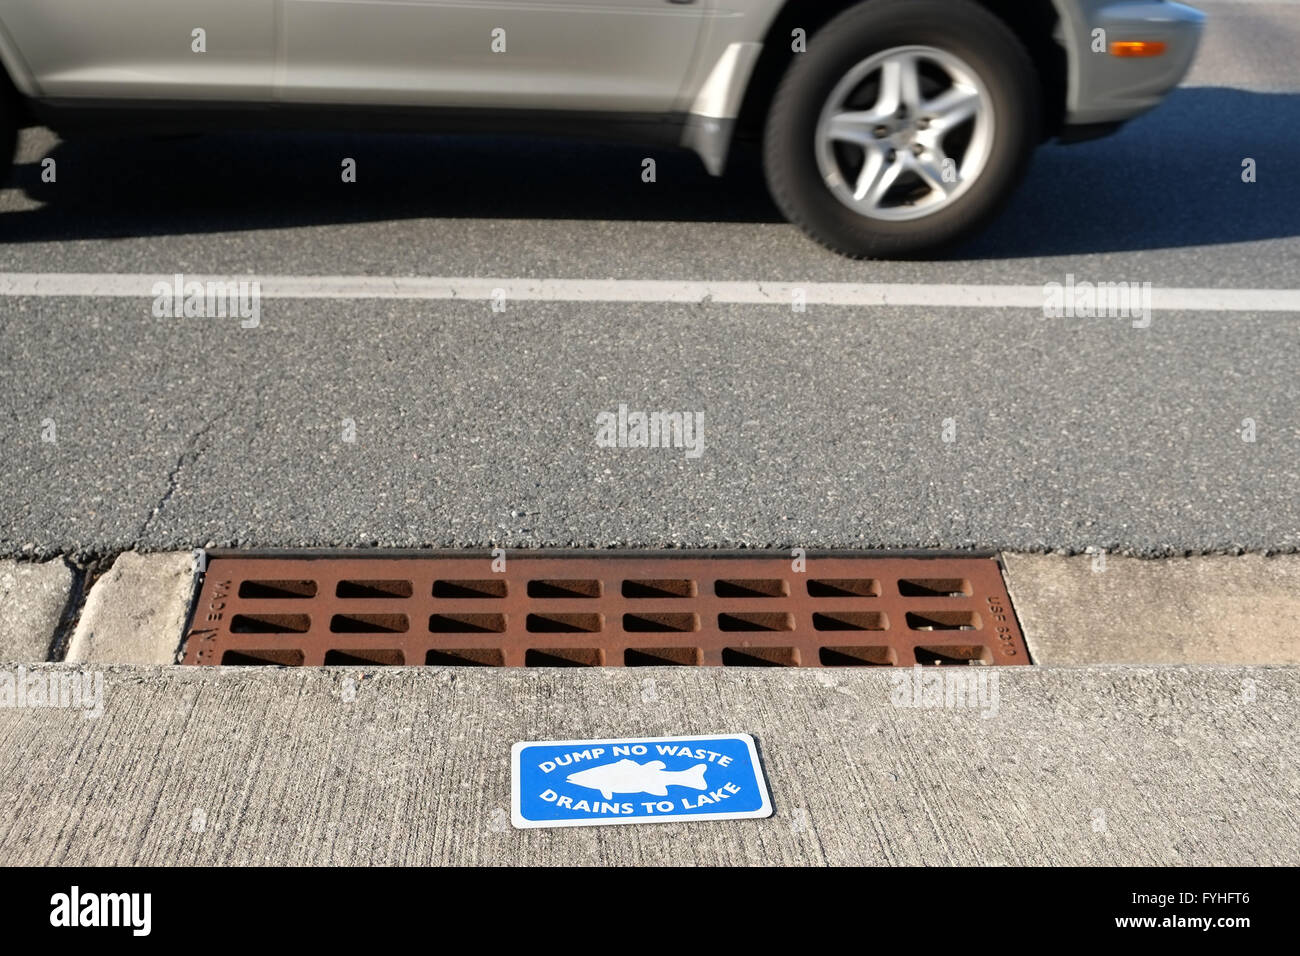 Dump no waste drains into lake sing on a highway storm outlet. April 2016 Stock Photo